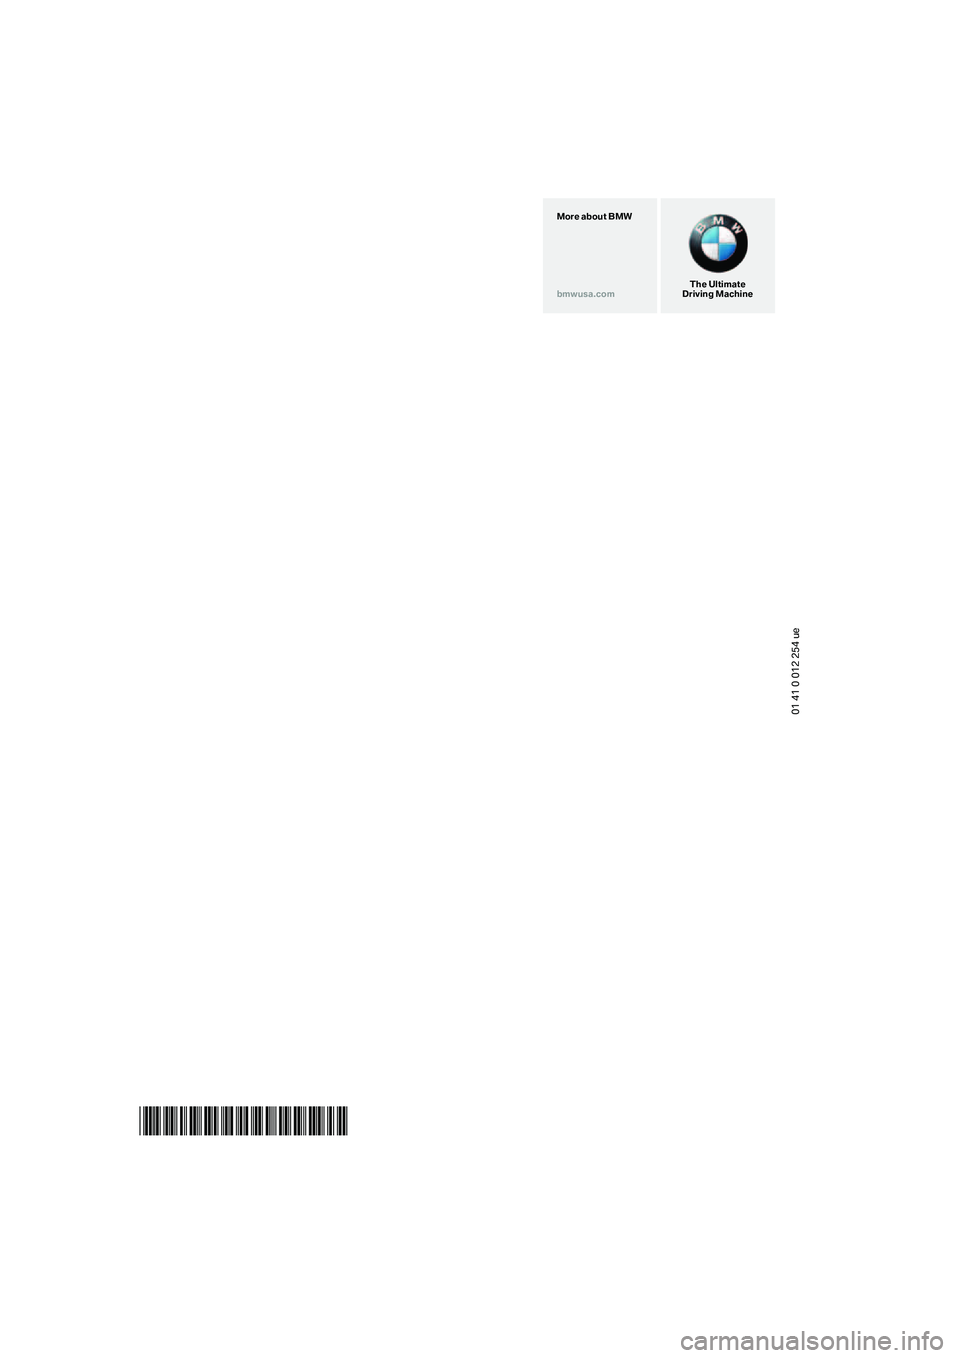 BMW 760LI 2006  Owners Manual 01 41 0 012 254 ue
*BL001225400A*
The Ultimate
Driving Machine More about BMW
bmwusa.com 